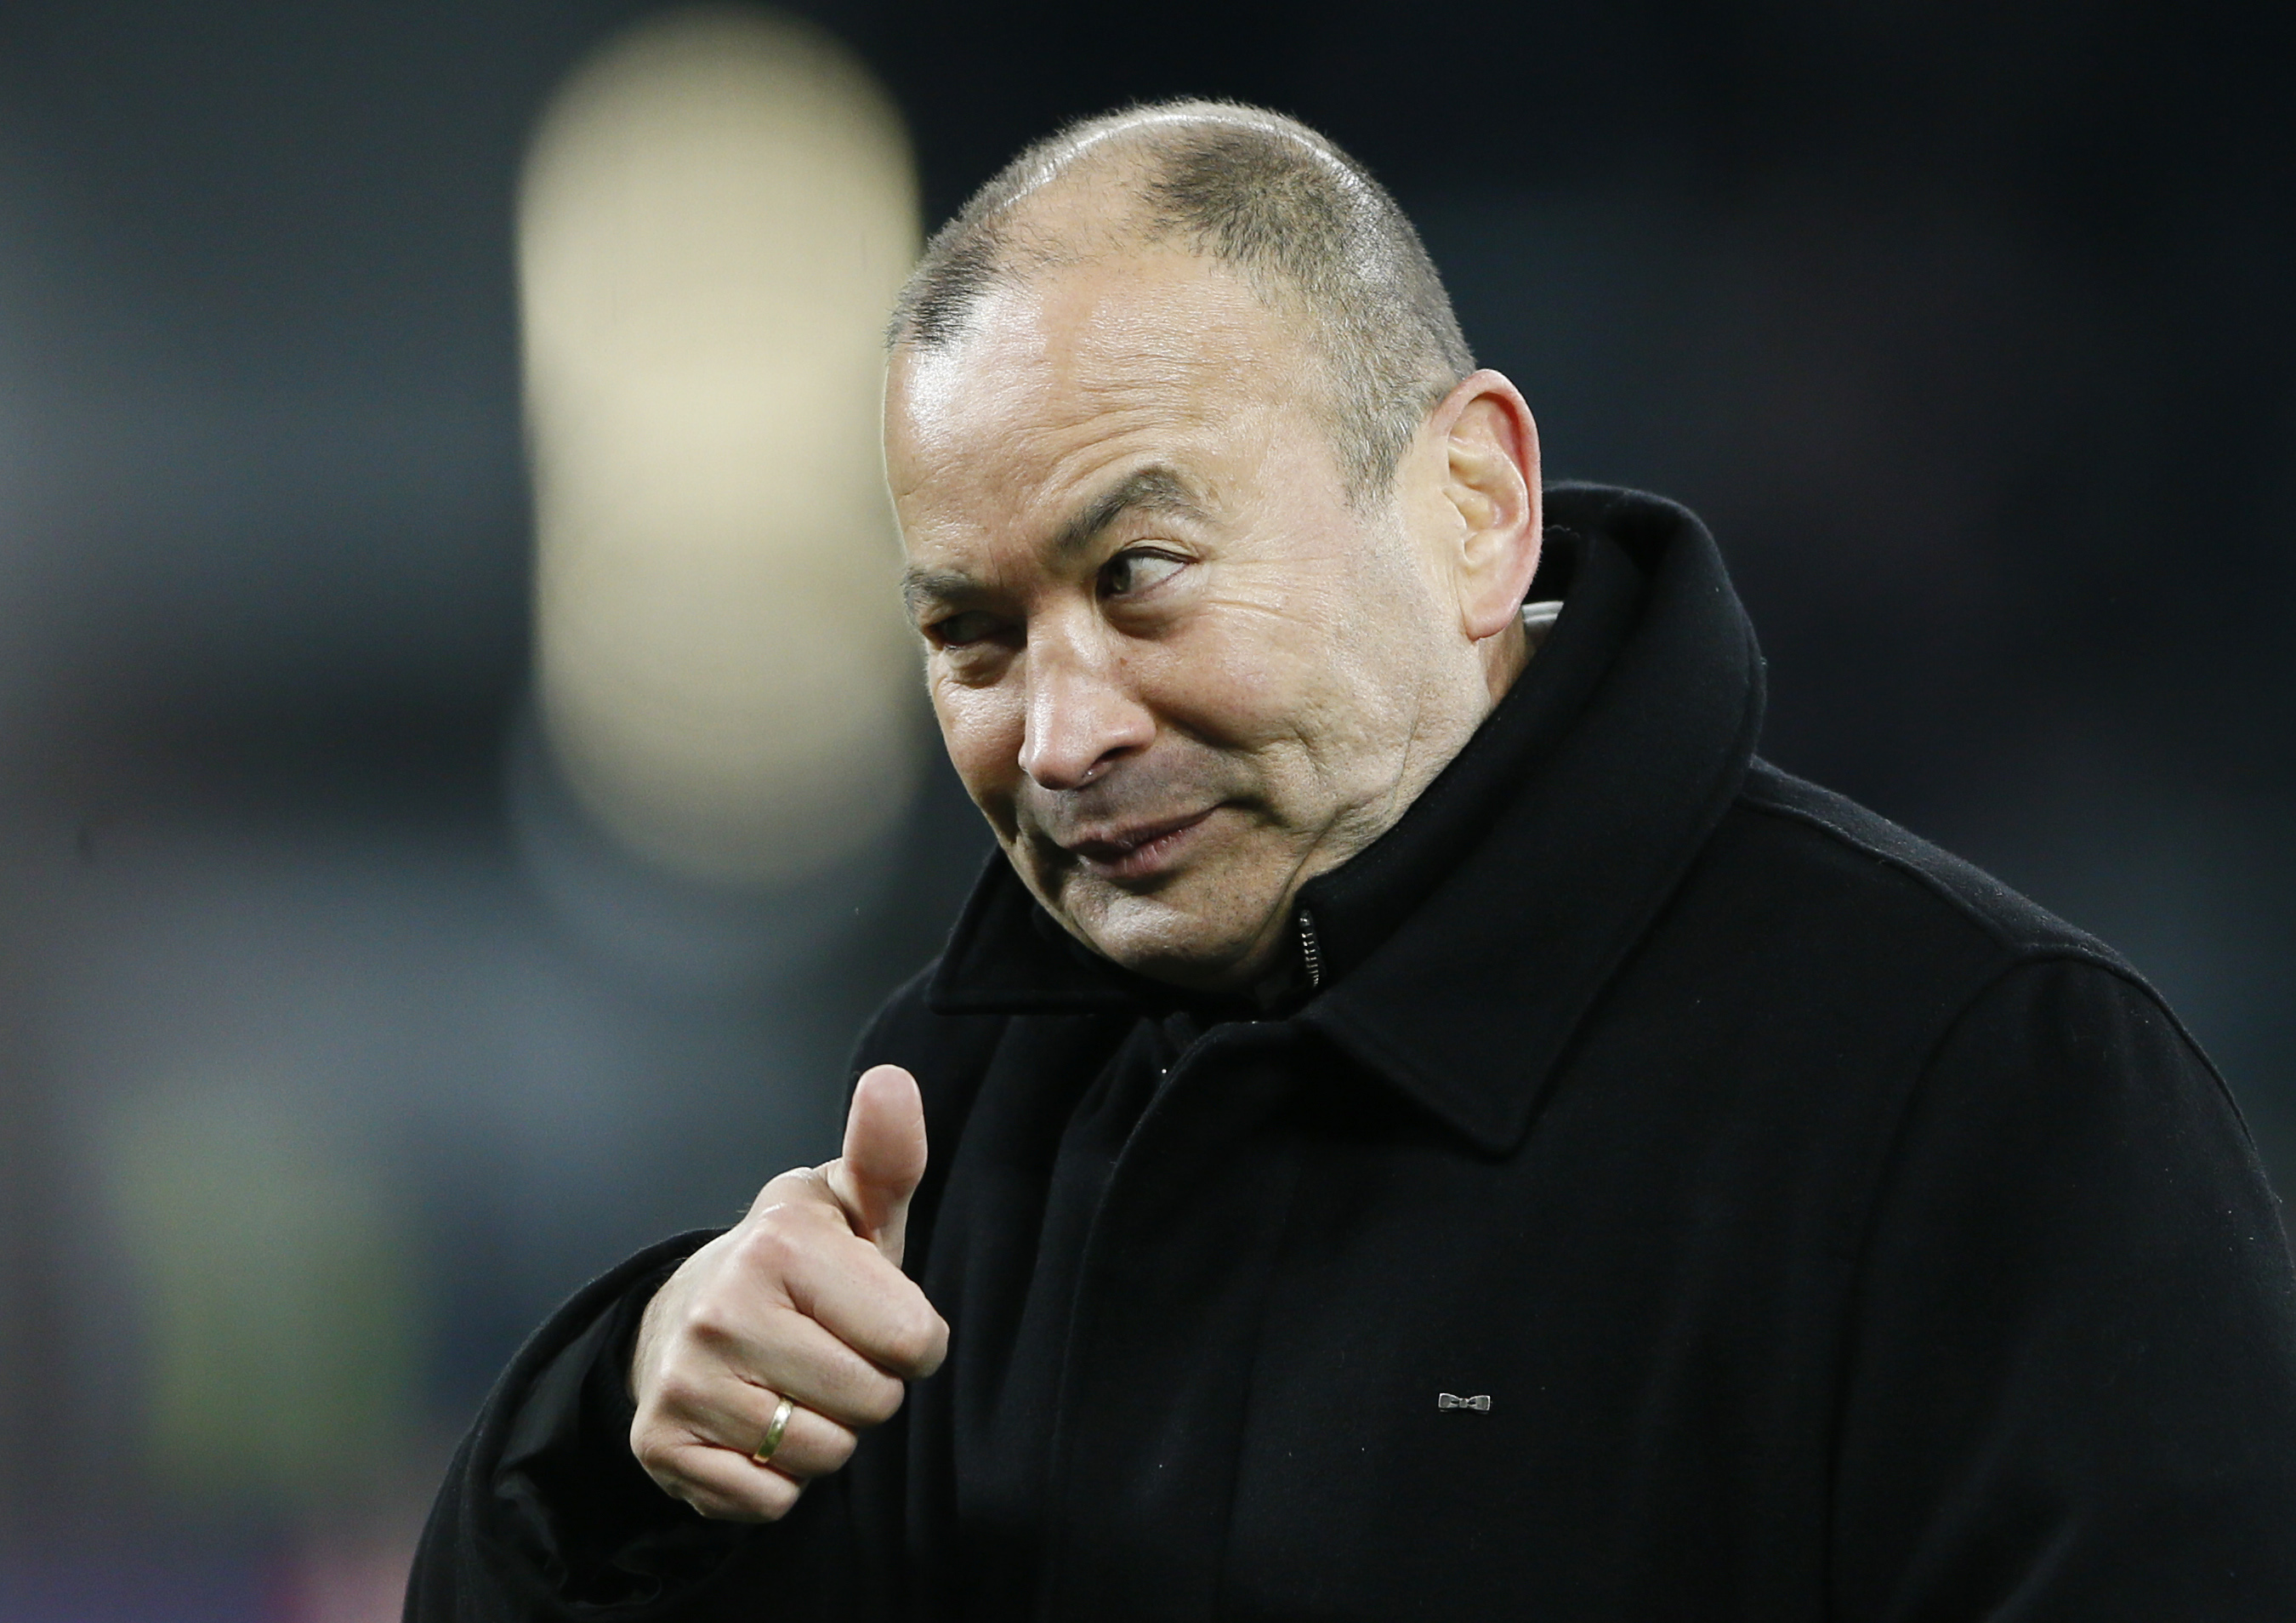 England head coach Eddie Jones played down his teams’ chances of sealing a long-awaited grand slam in the Six Nations Championship. Photo: Reuters